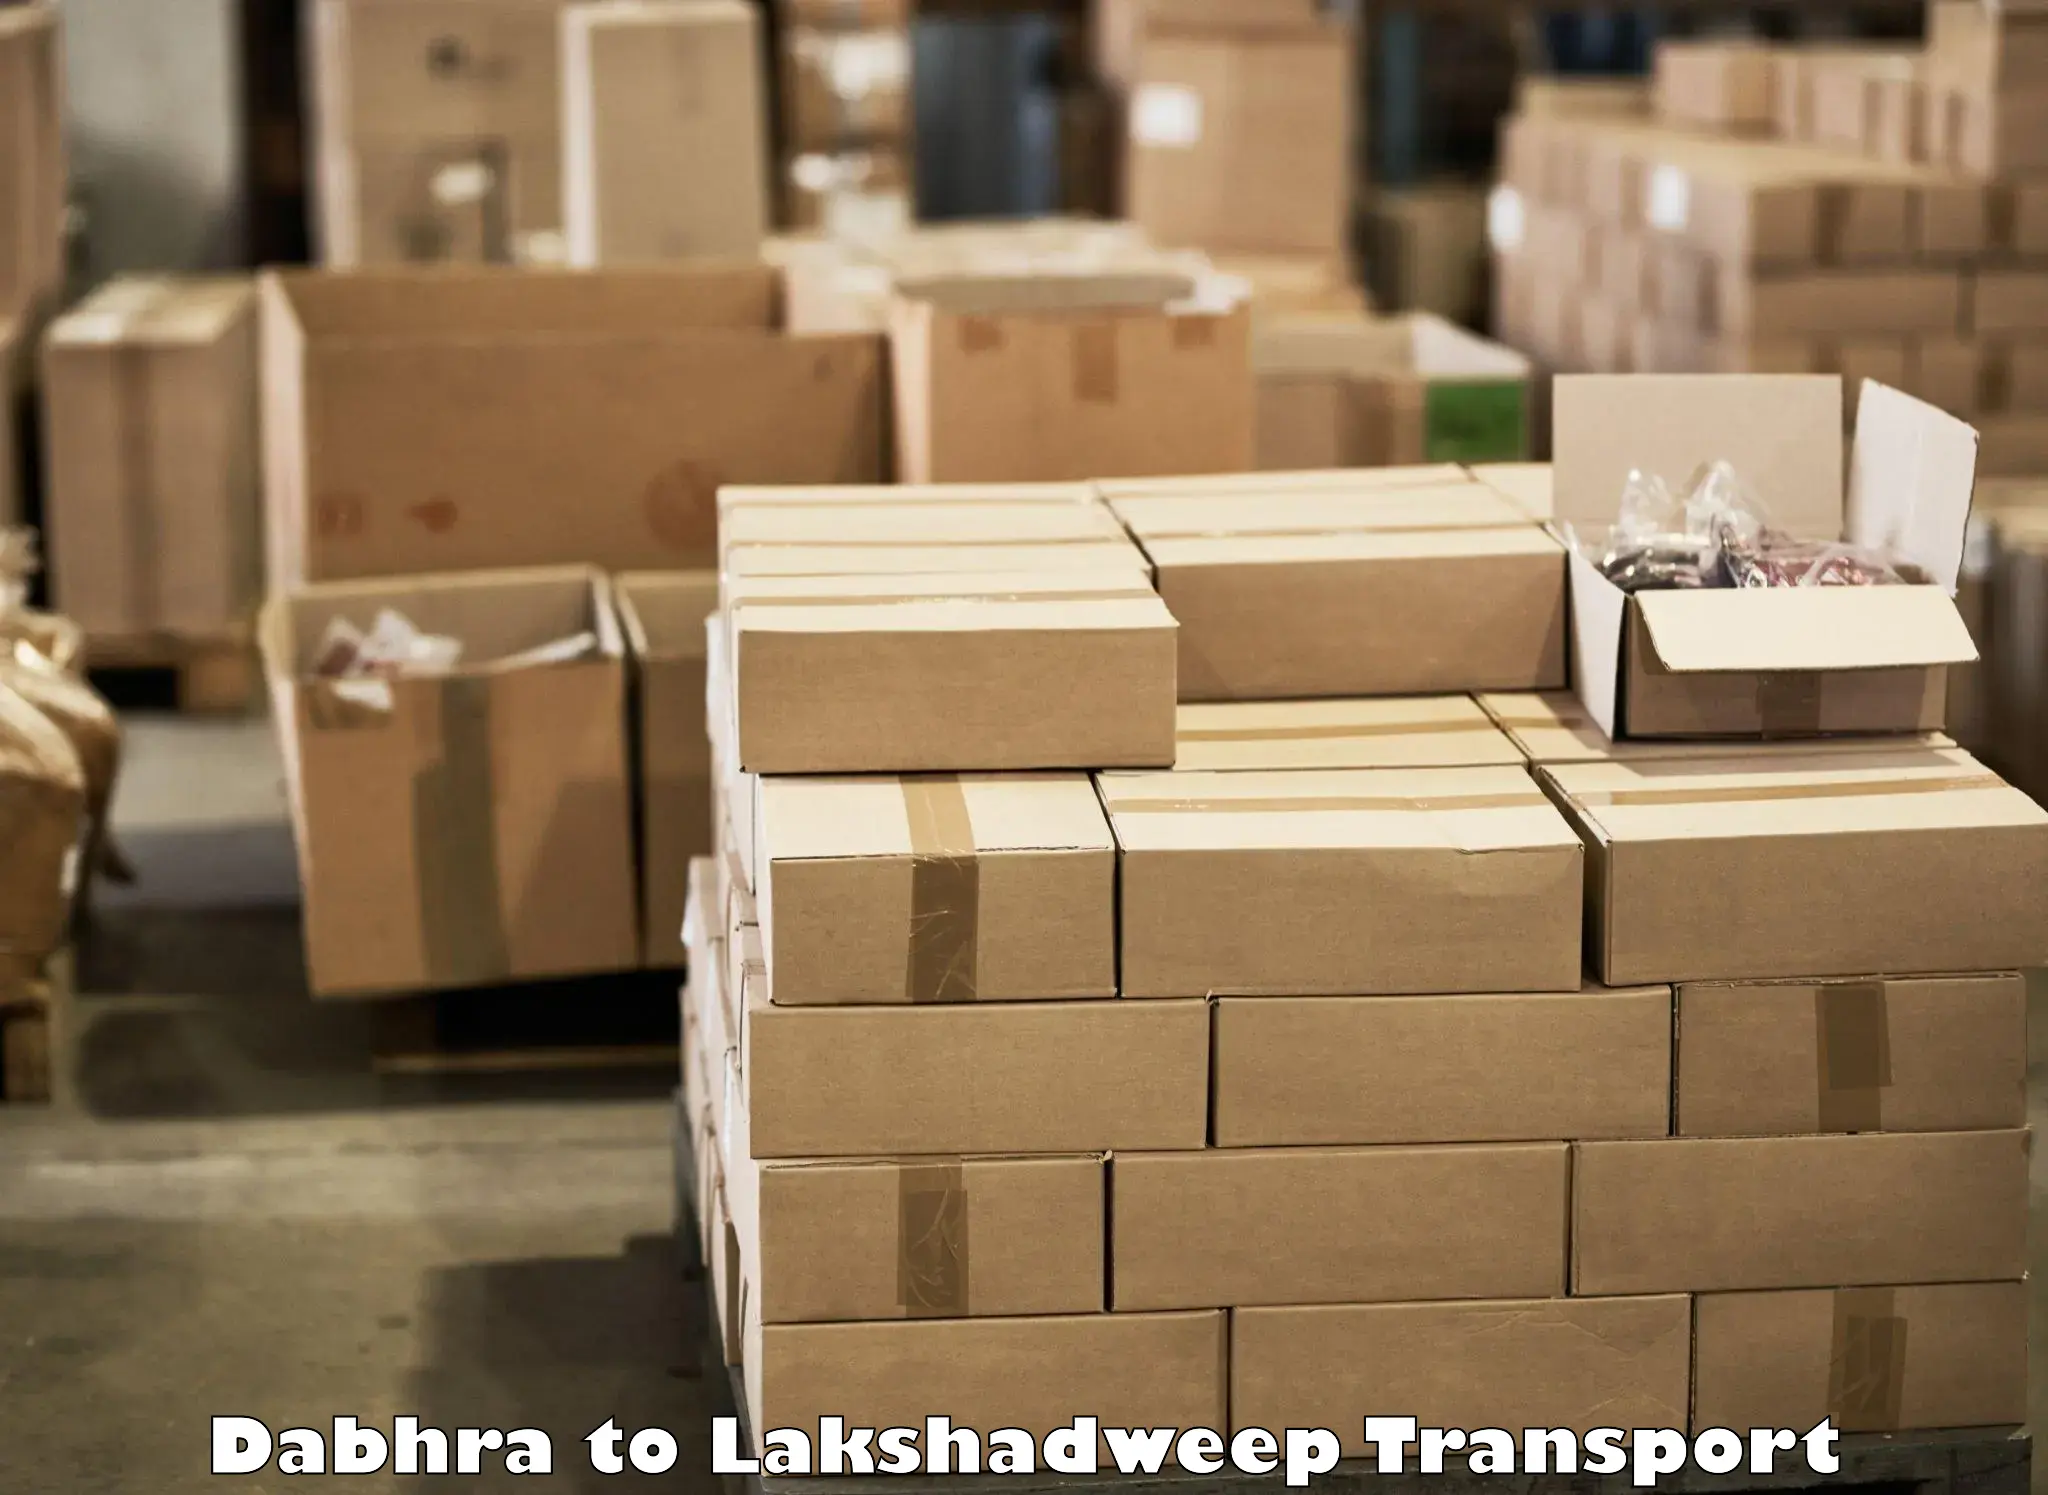 Truck transport companies in India Dabhra to Lakshadweep